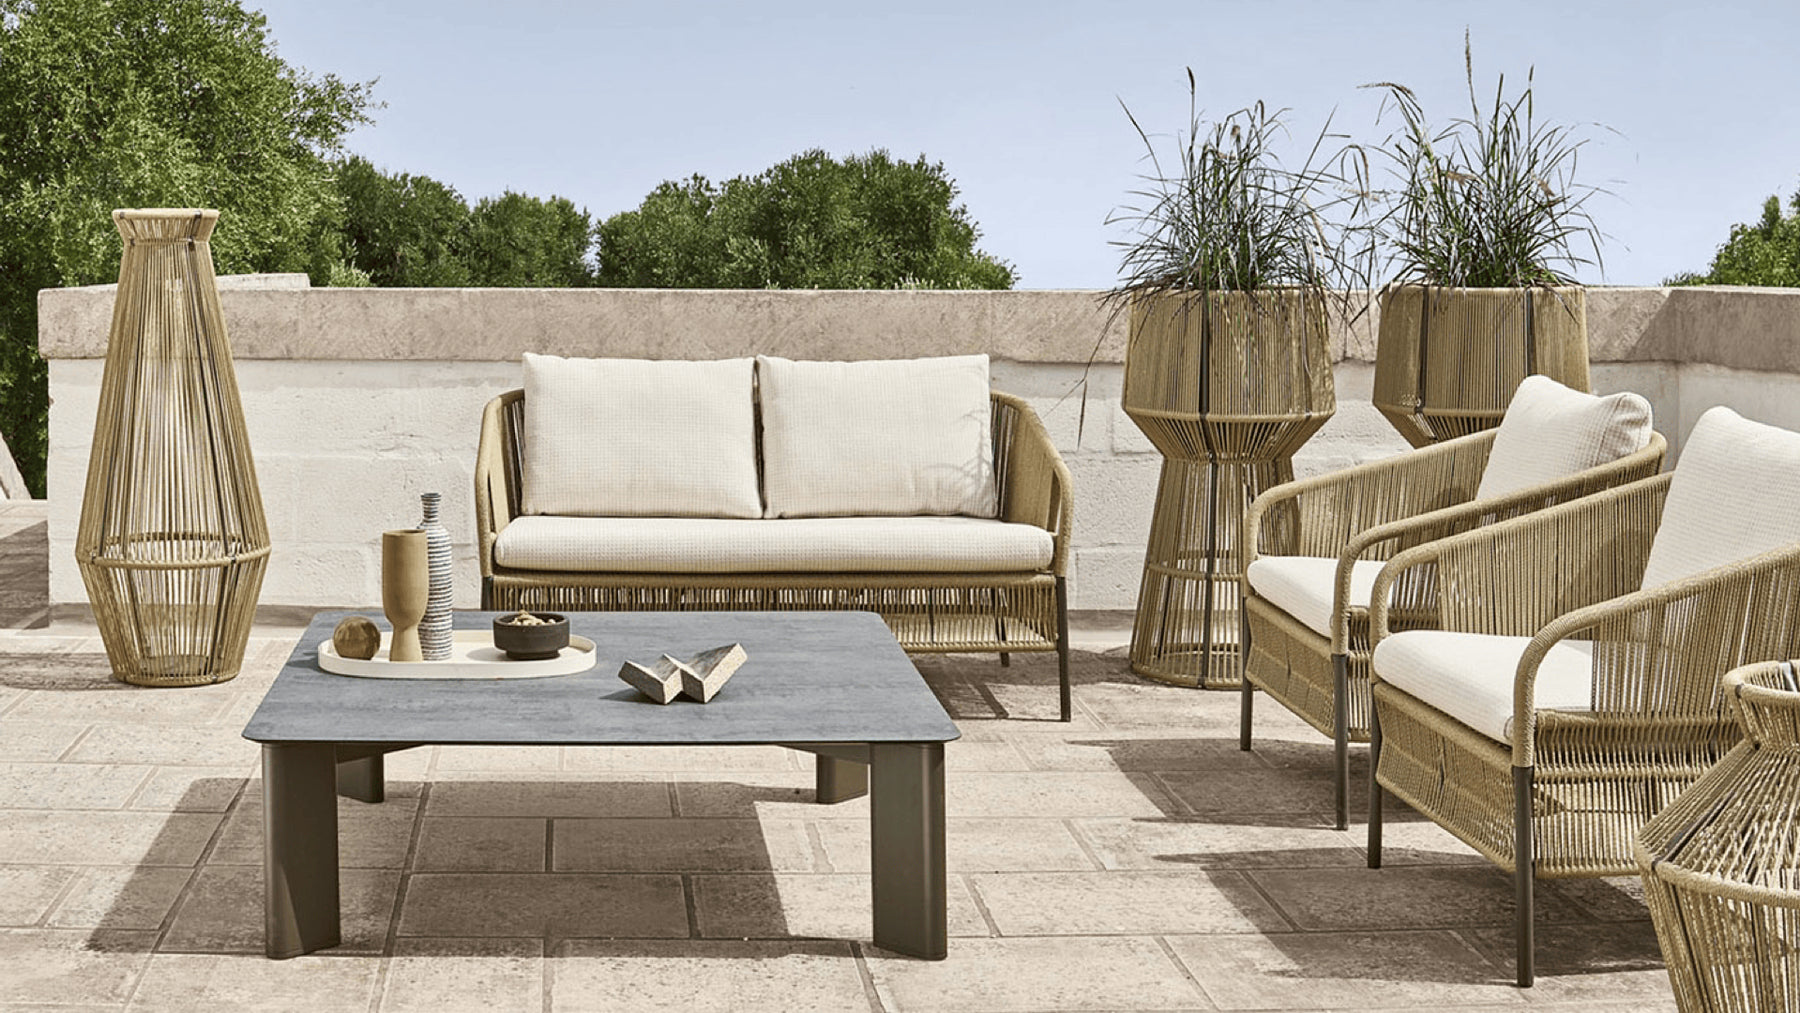 Intricate wicker outdoor lounge furniture and planters on a patio in the sun.